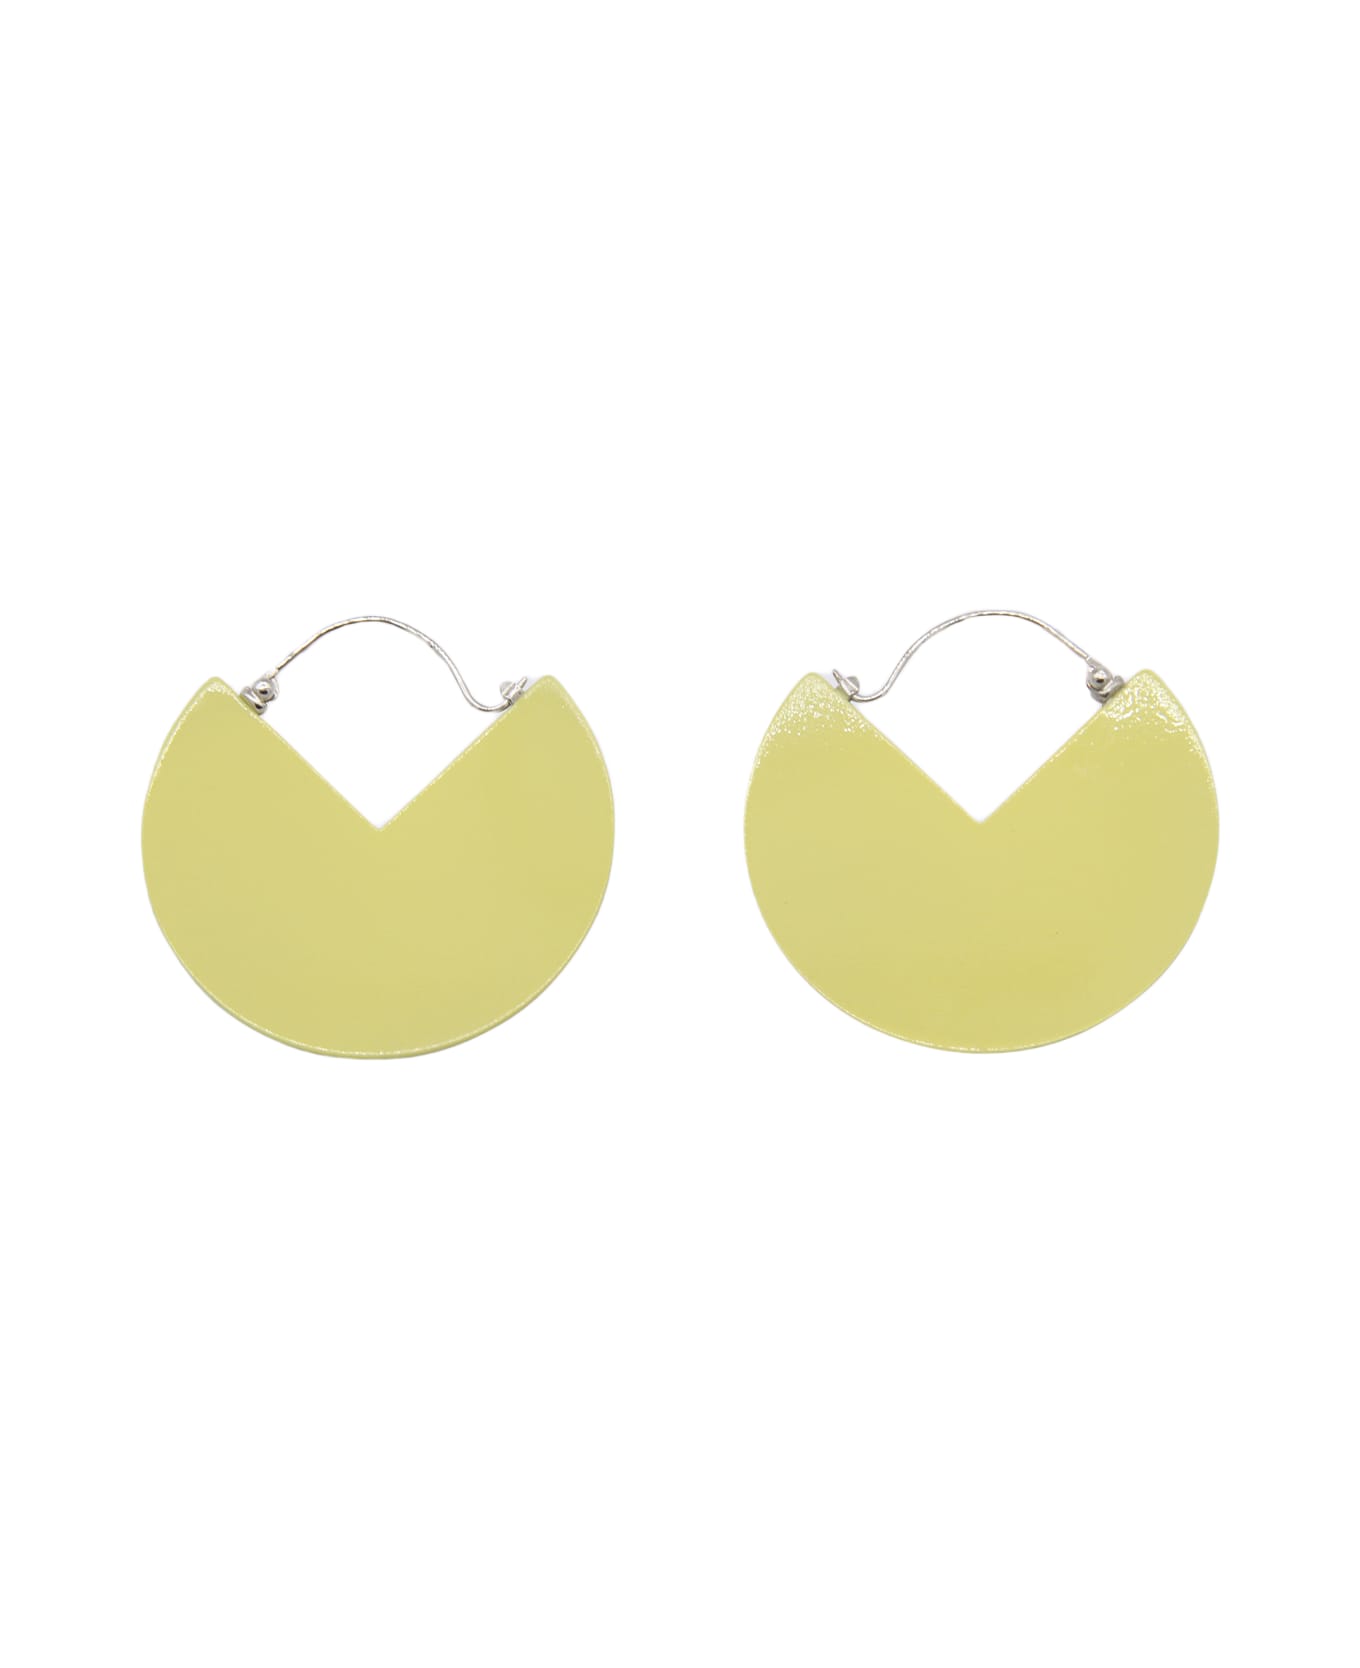 Isabel Marant Light Yellow And Silver '90 Earrings - LIGHT YELLOW/SILVER